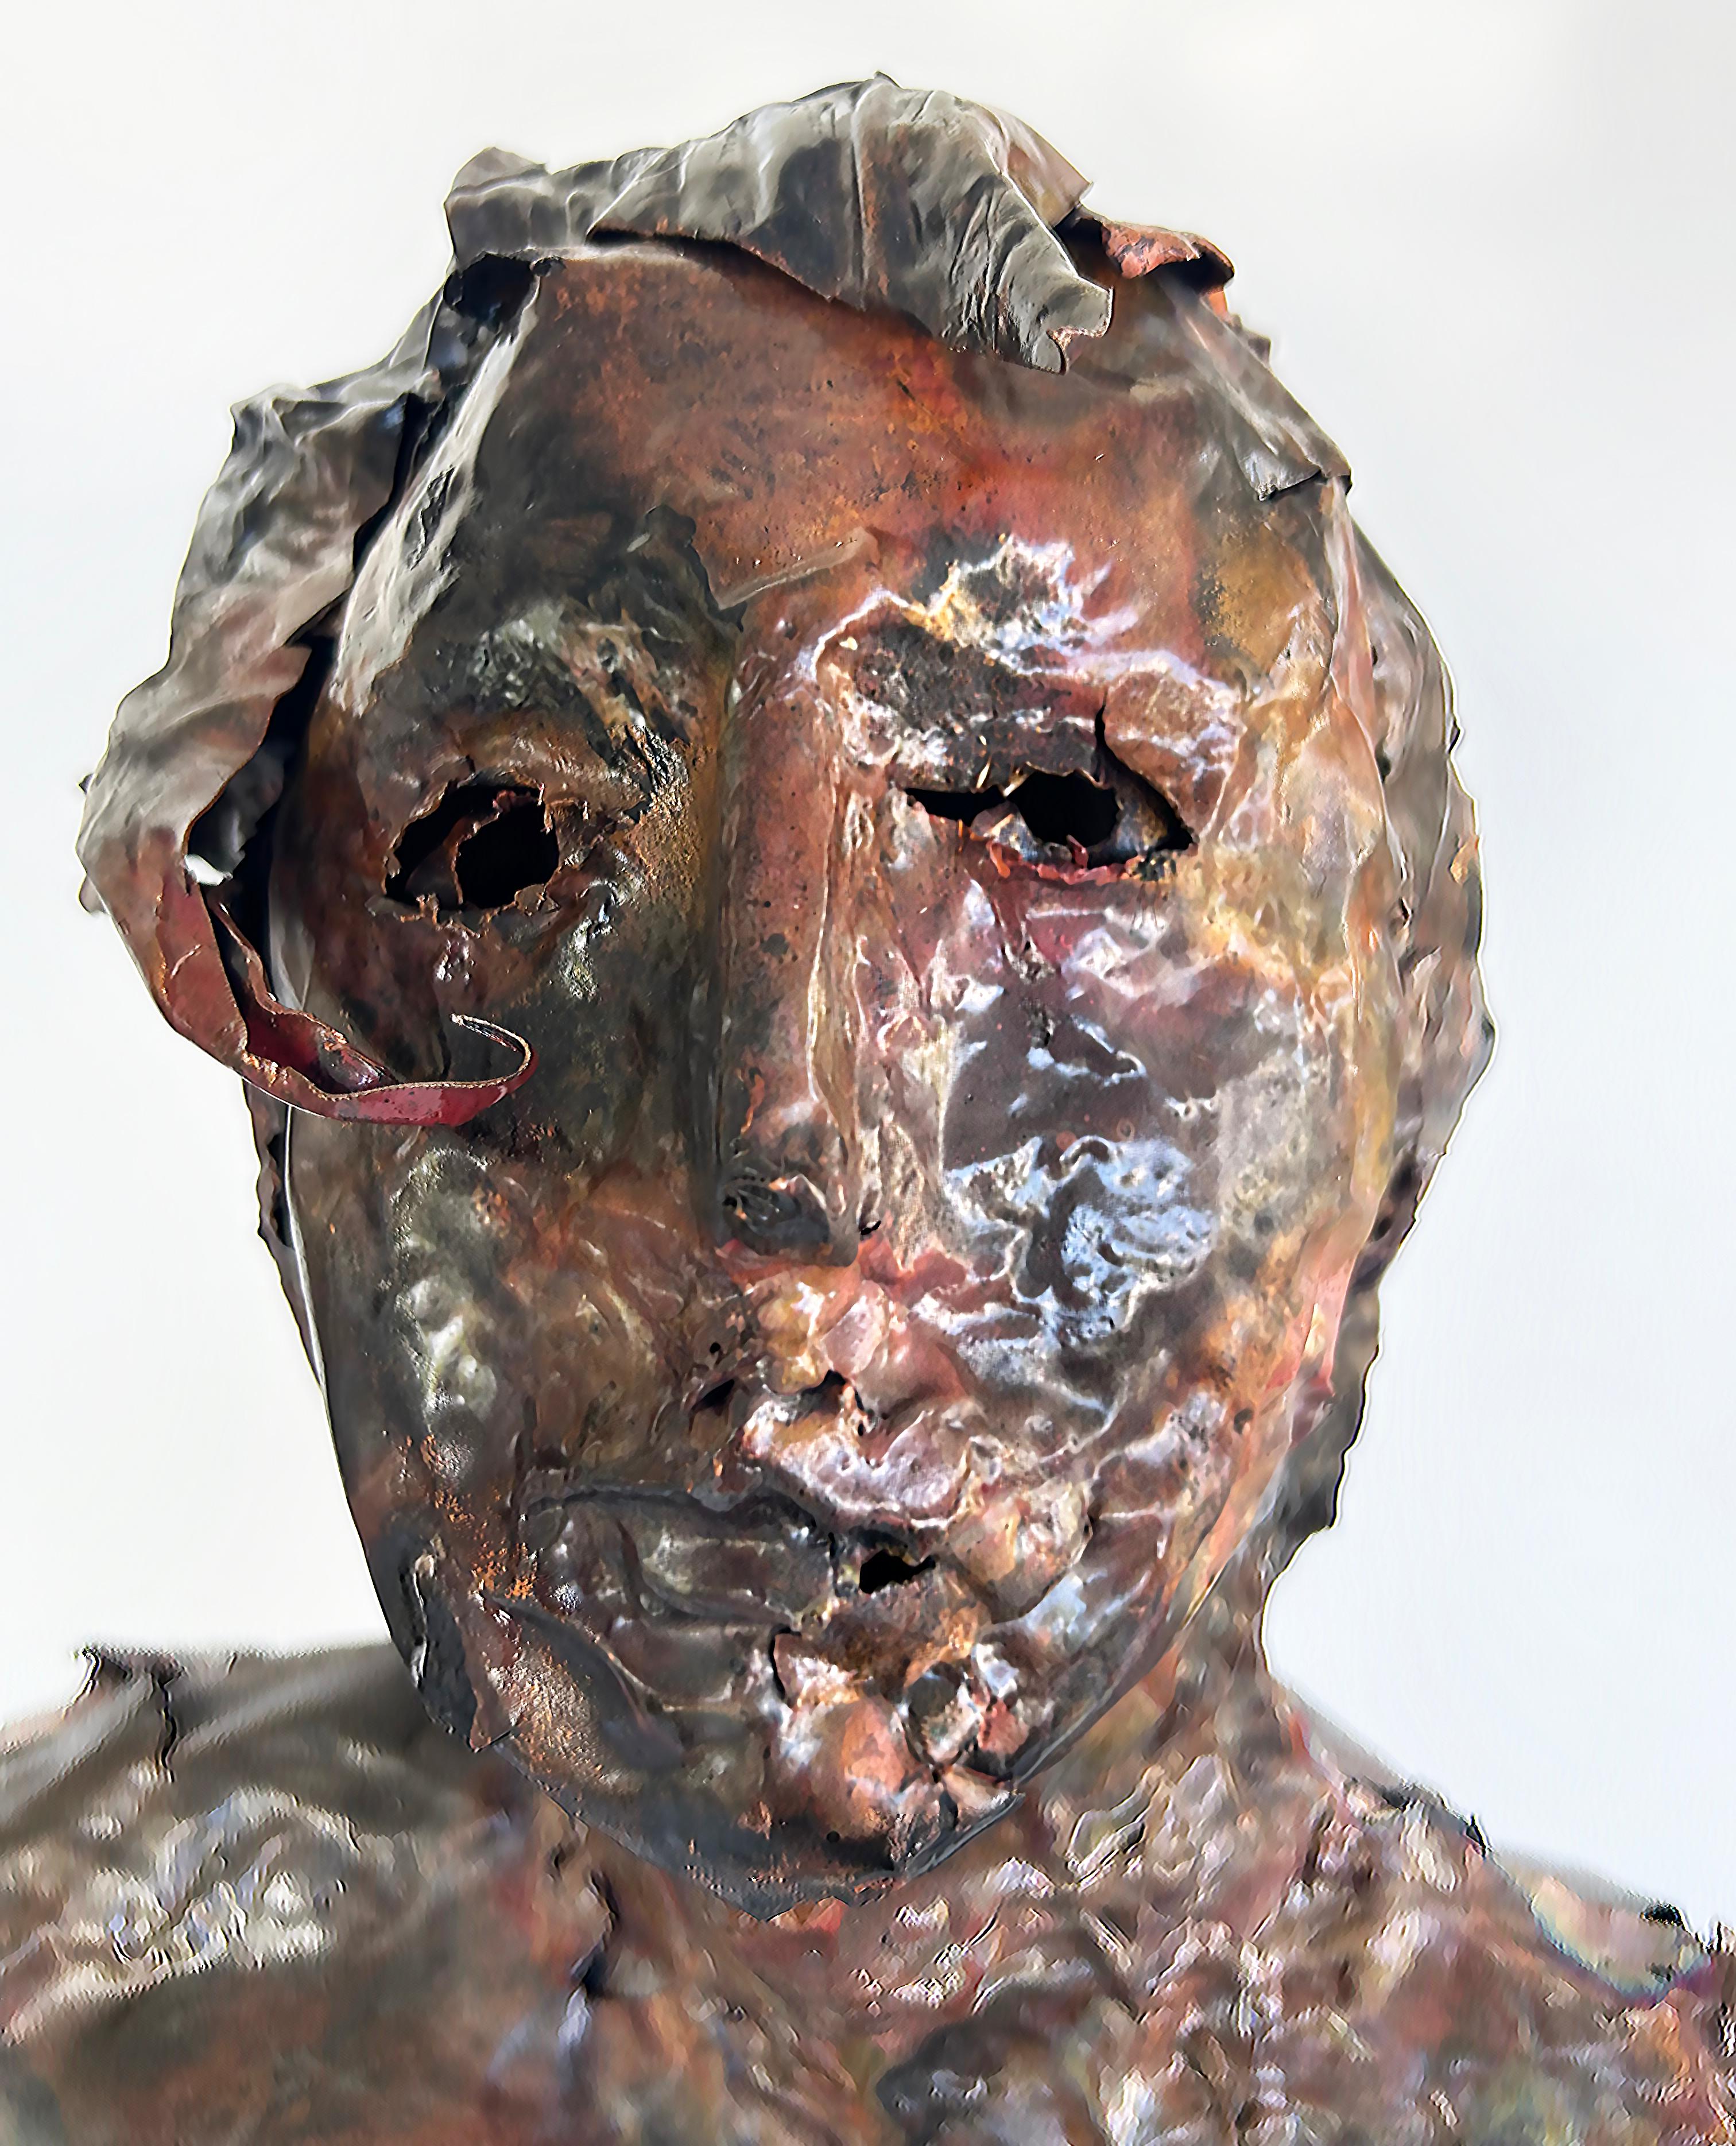 Hand-Crafted Life-Size Figurative Copper Statue Sculpture by Davis Murphy